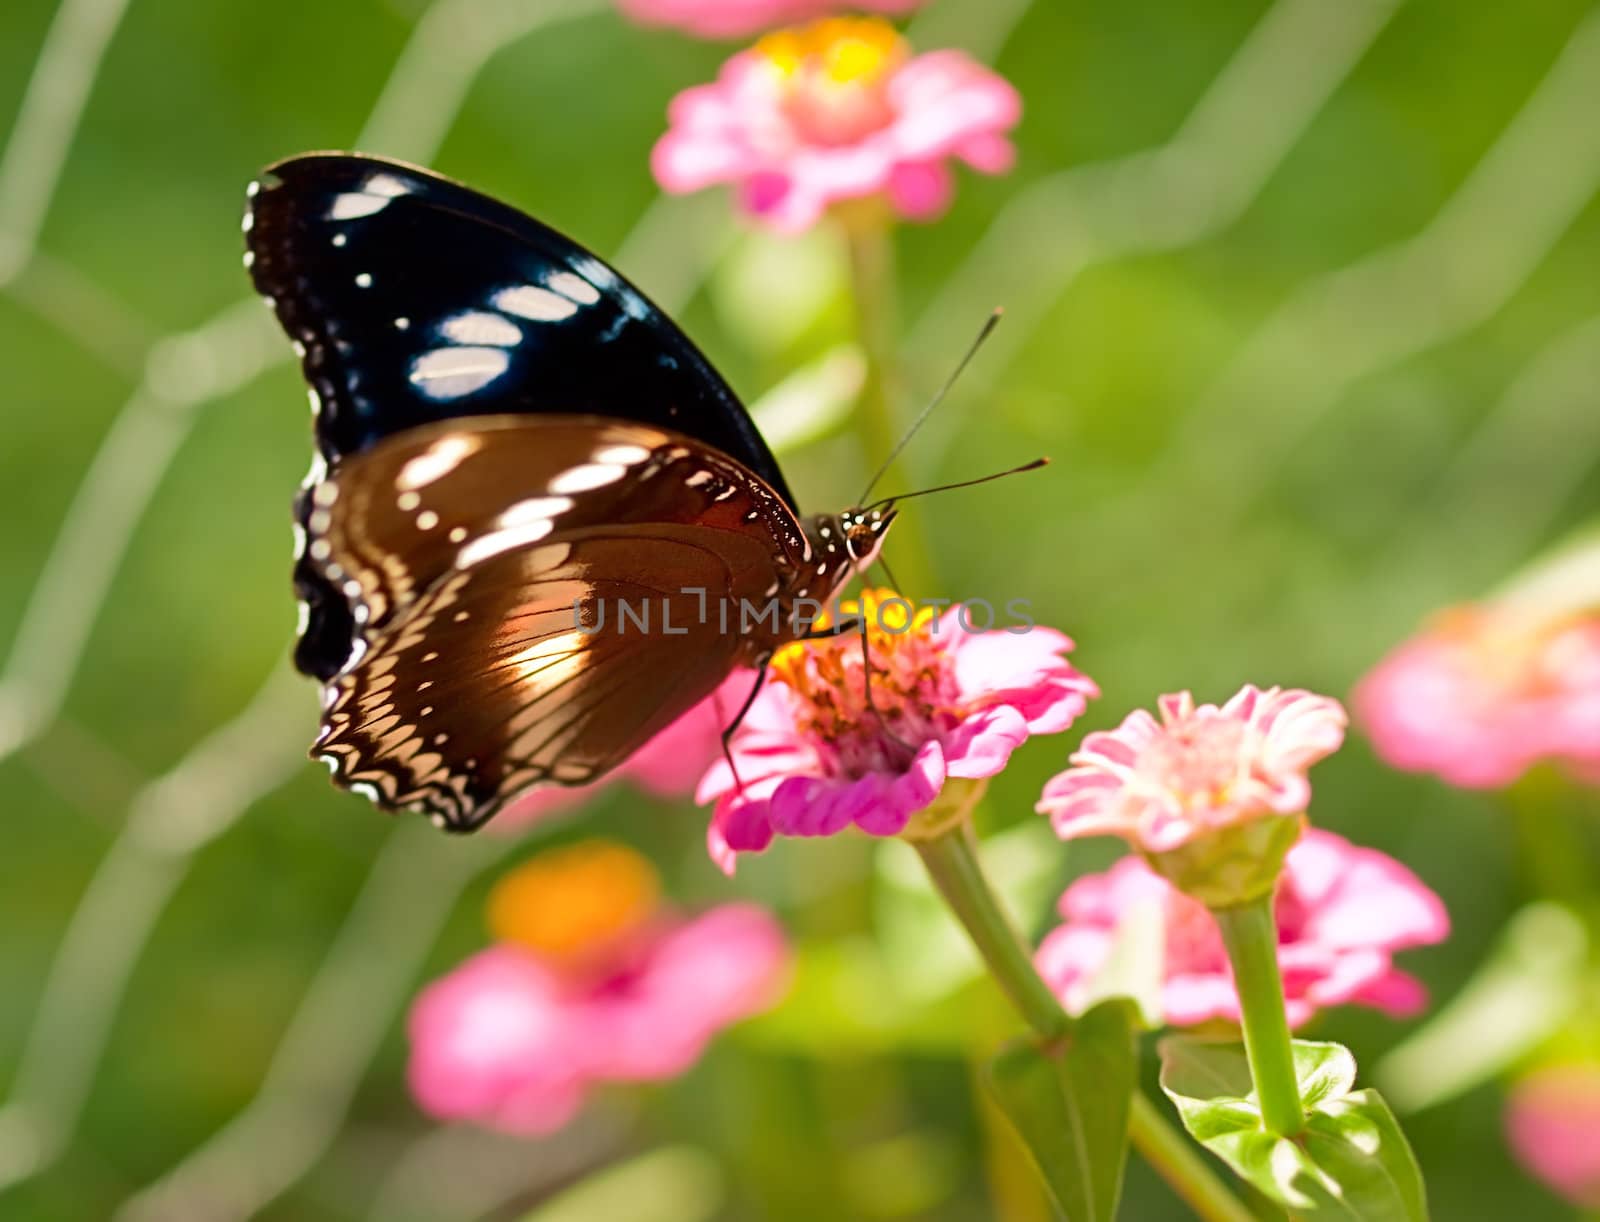 Australian wildlife living butterfly Common eggfly species live on a pink flower